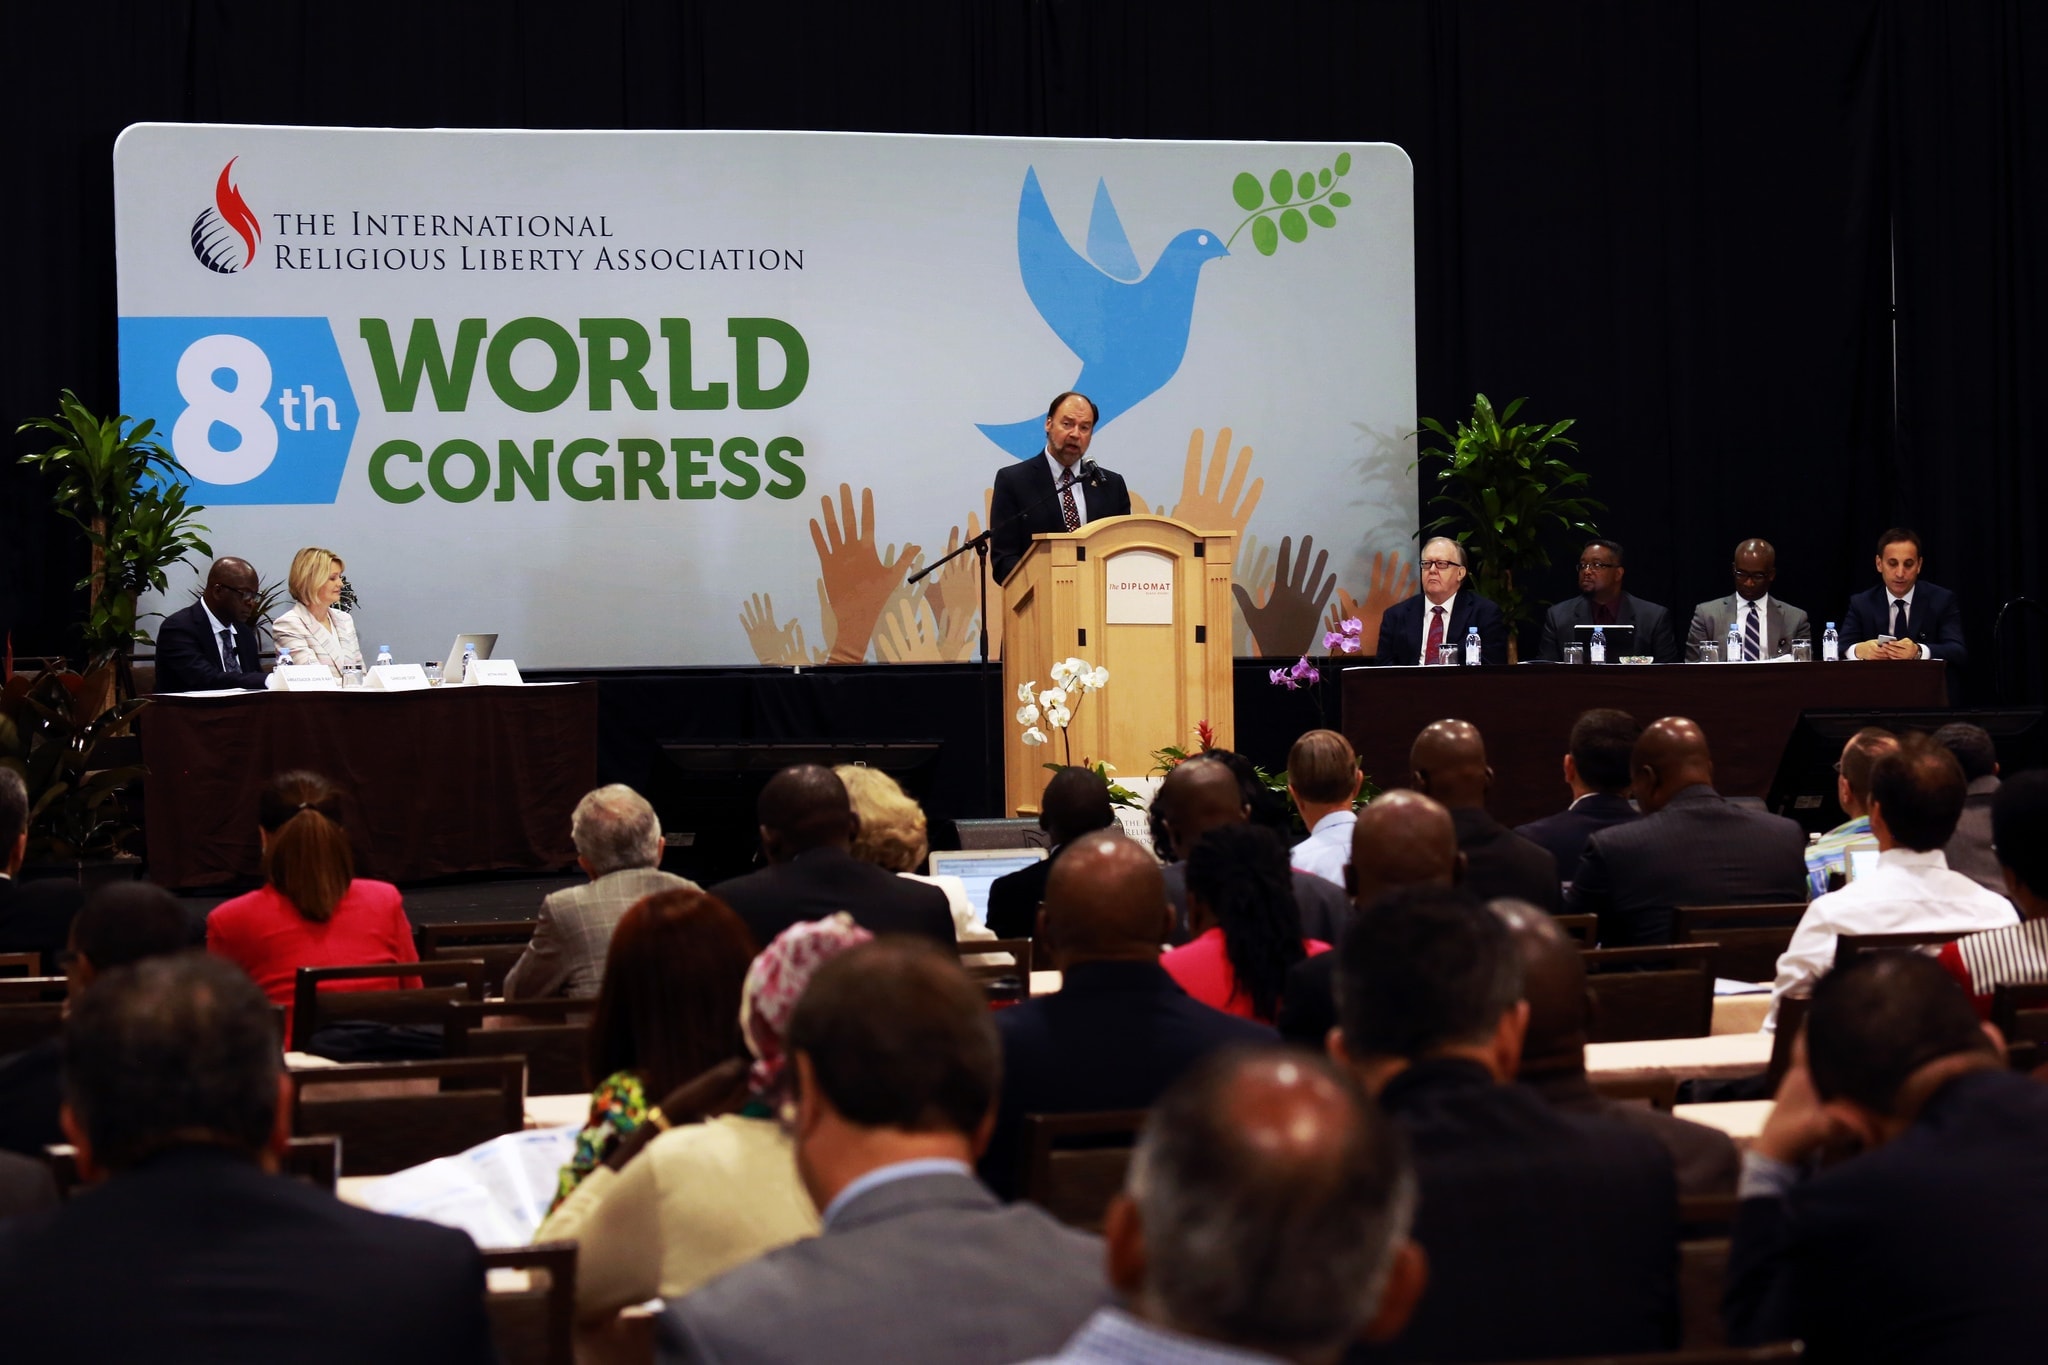 IRLA's President John R. Nay officially opens the IRLA's 8th World Congress in Ft. Lauderdale, Florida, United States, on August 22. [Photo: Mylon Medley, Adventist News Network]